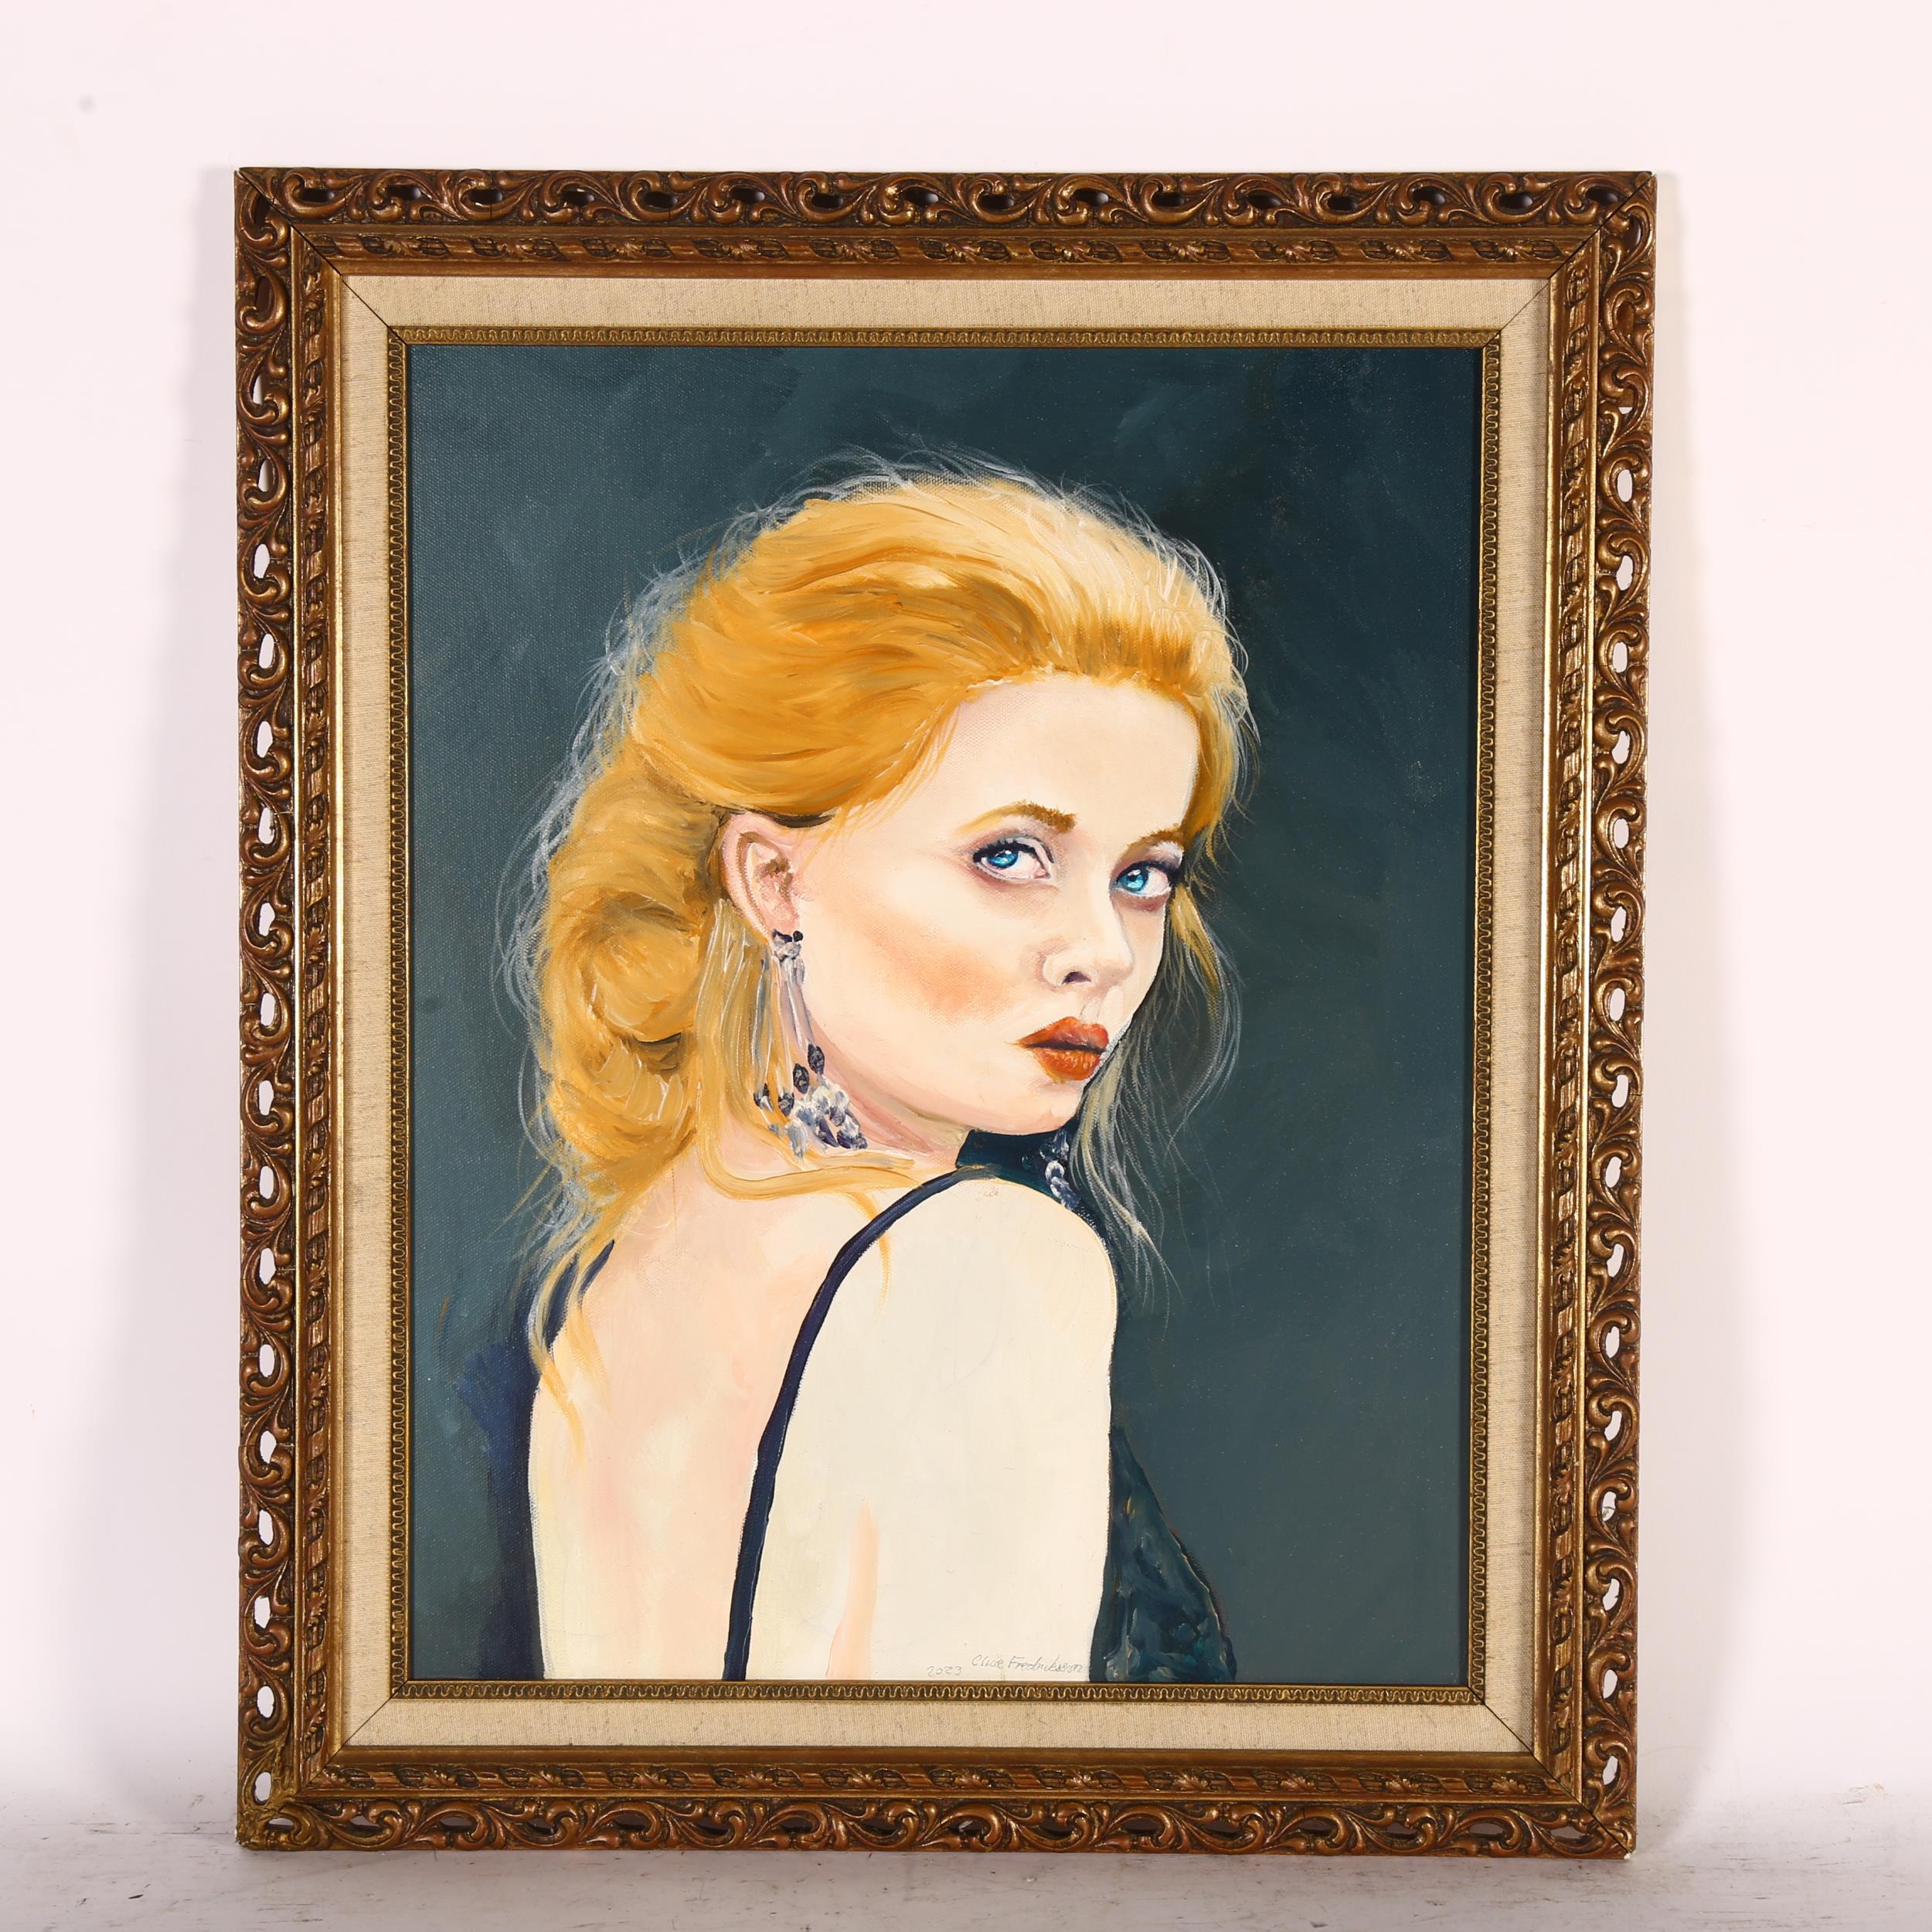 Clive Fredriksson, oil on board, portrait study of a lady with blonde hair, 62cm x 52cm overall,